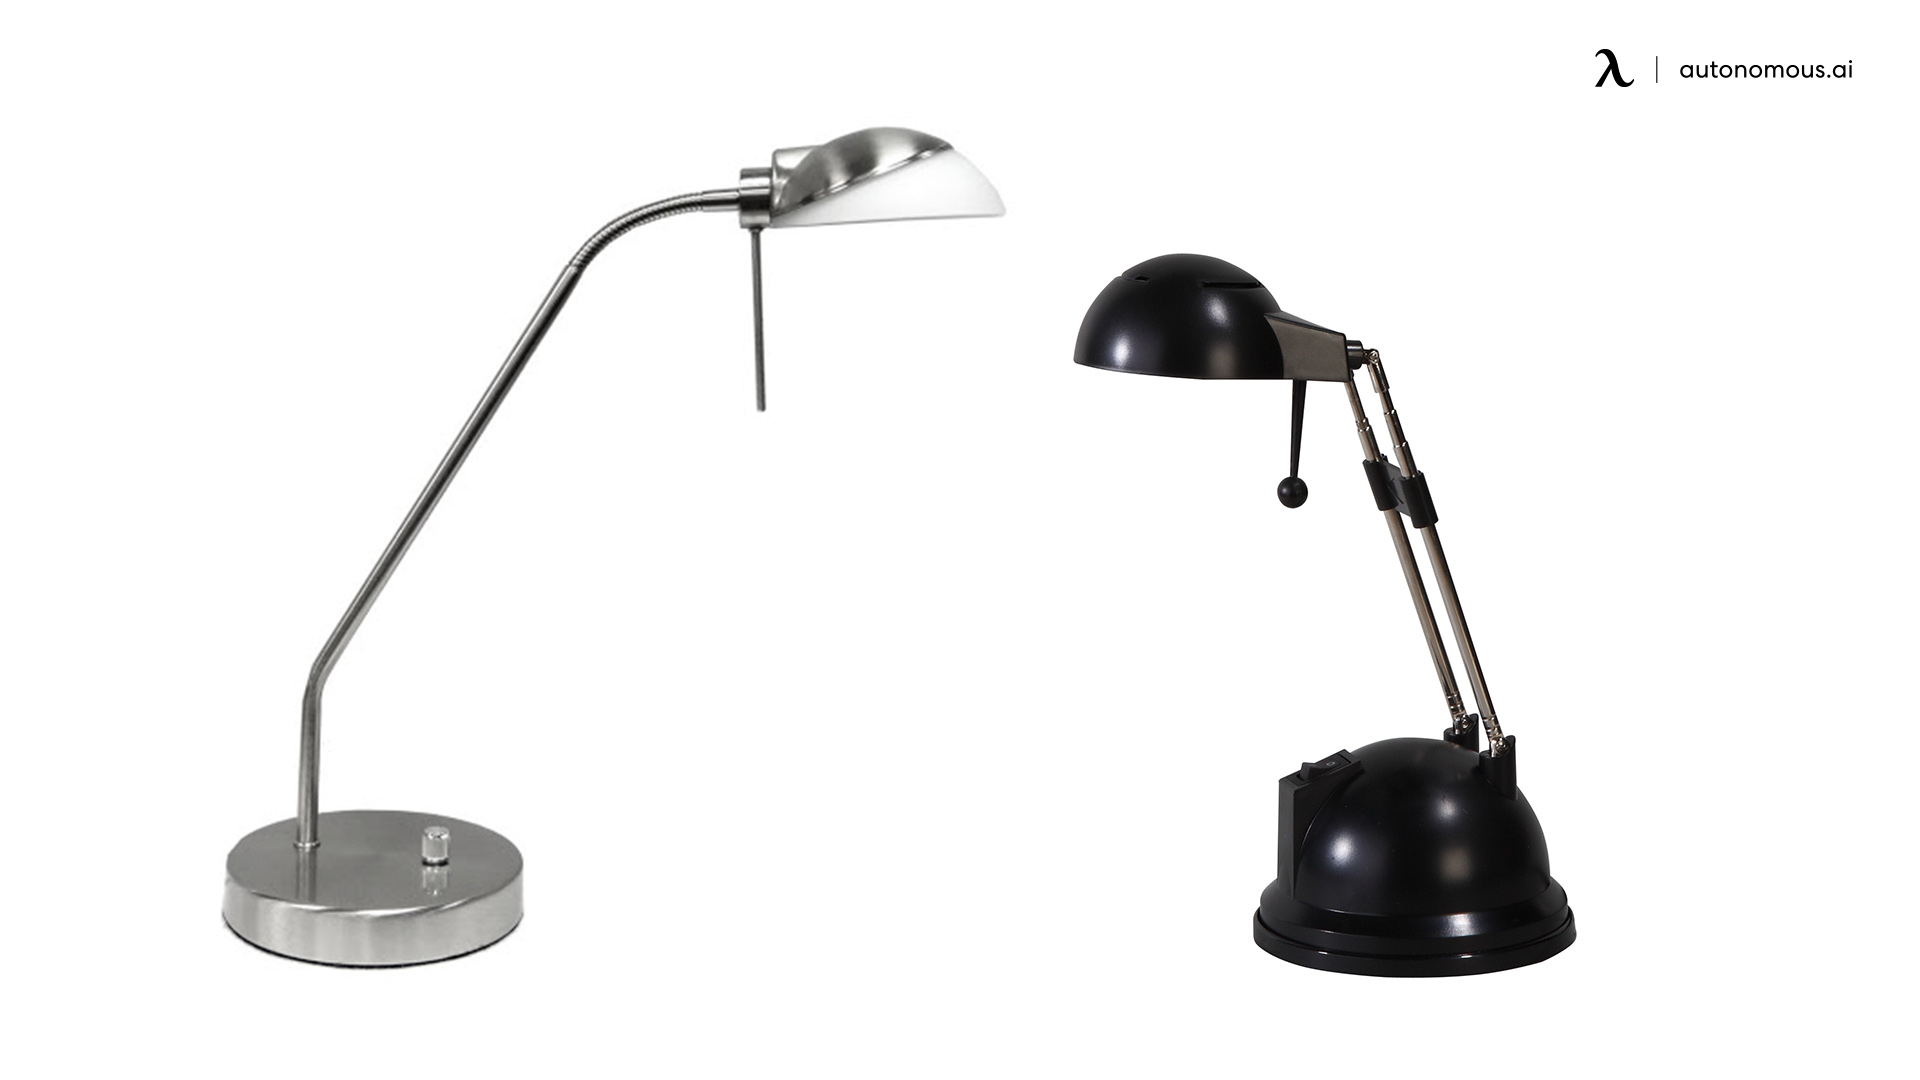 Buy desk lamp online and attributes to consider